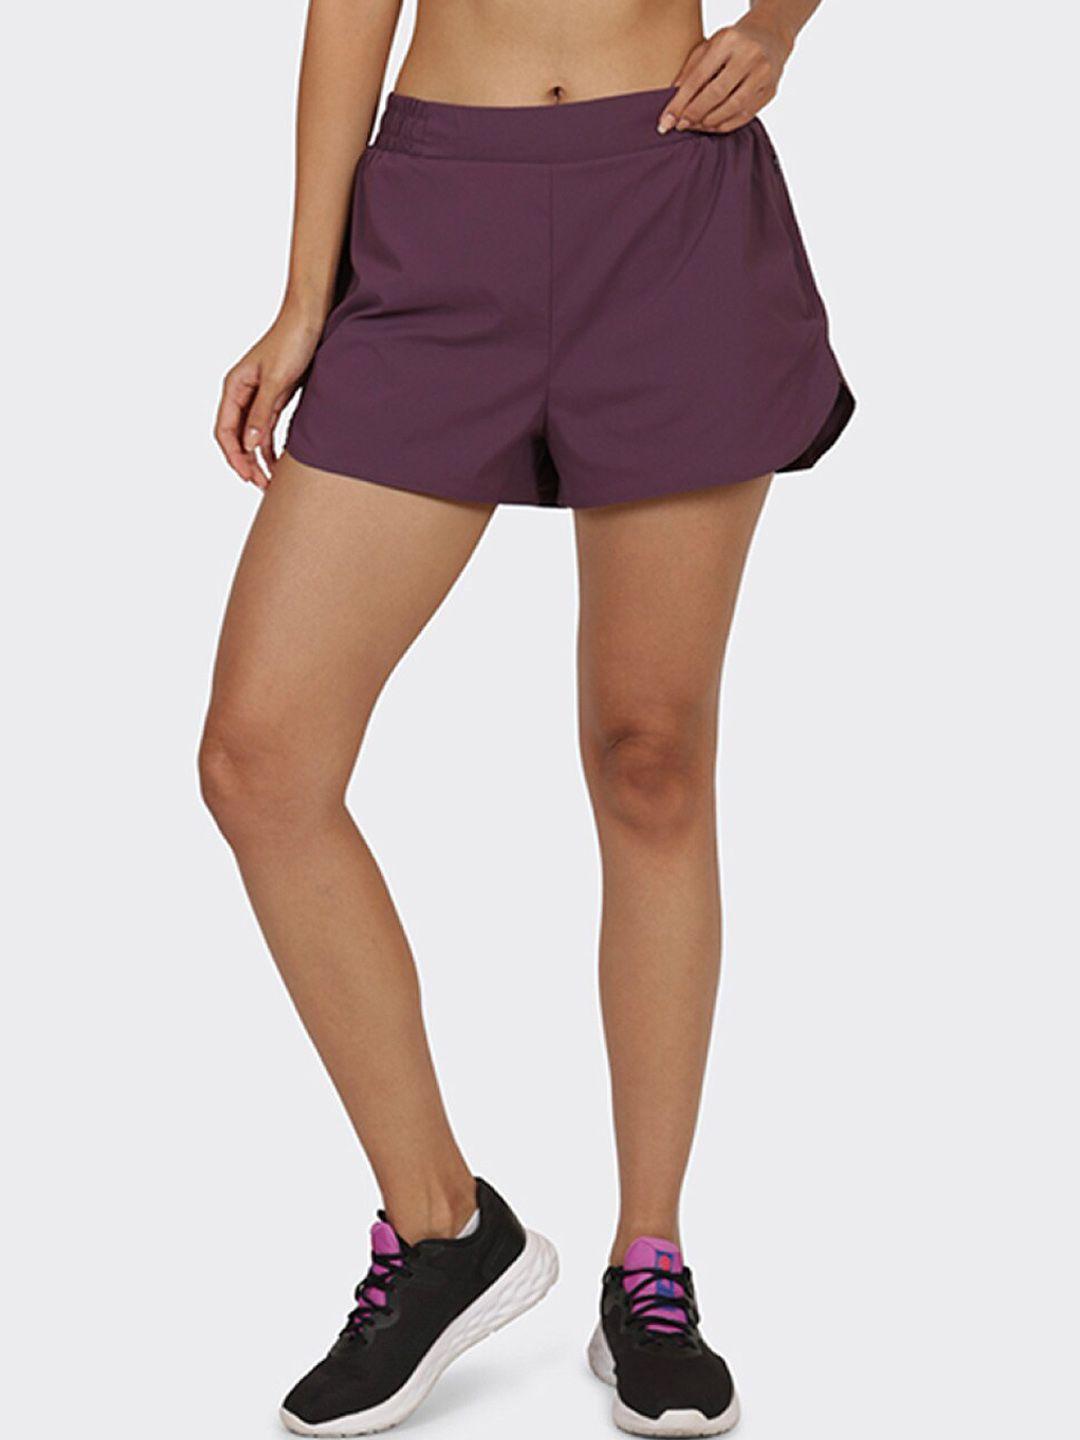 blissclub-women-relaxed-fit-high-rise-sports-shorts